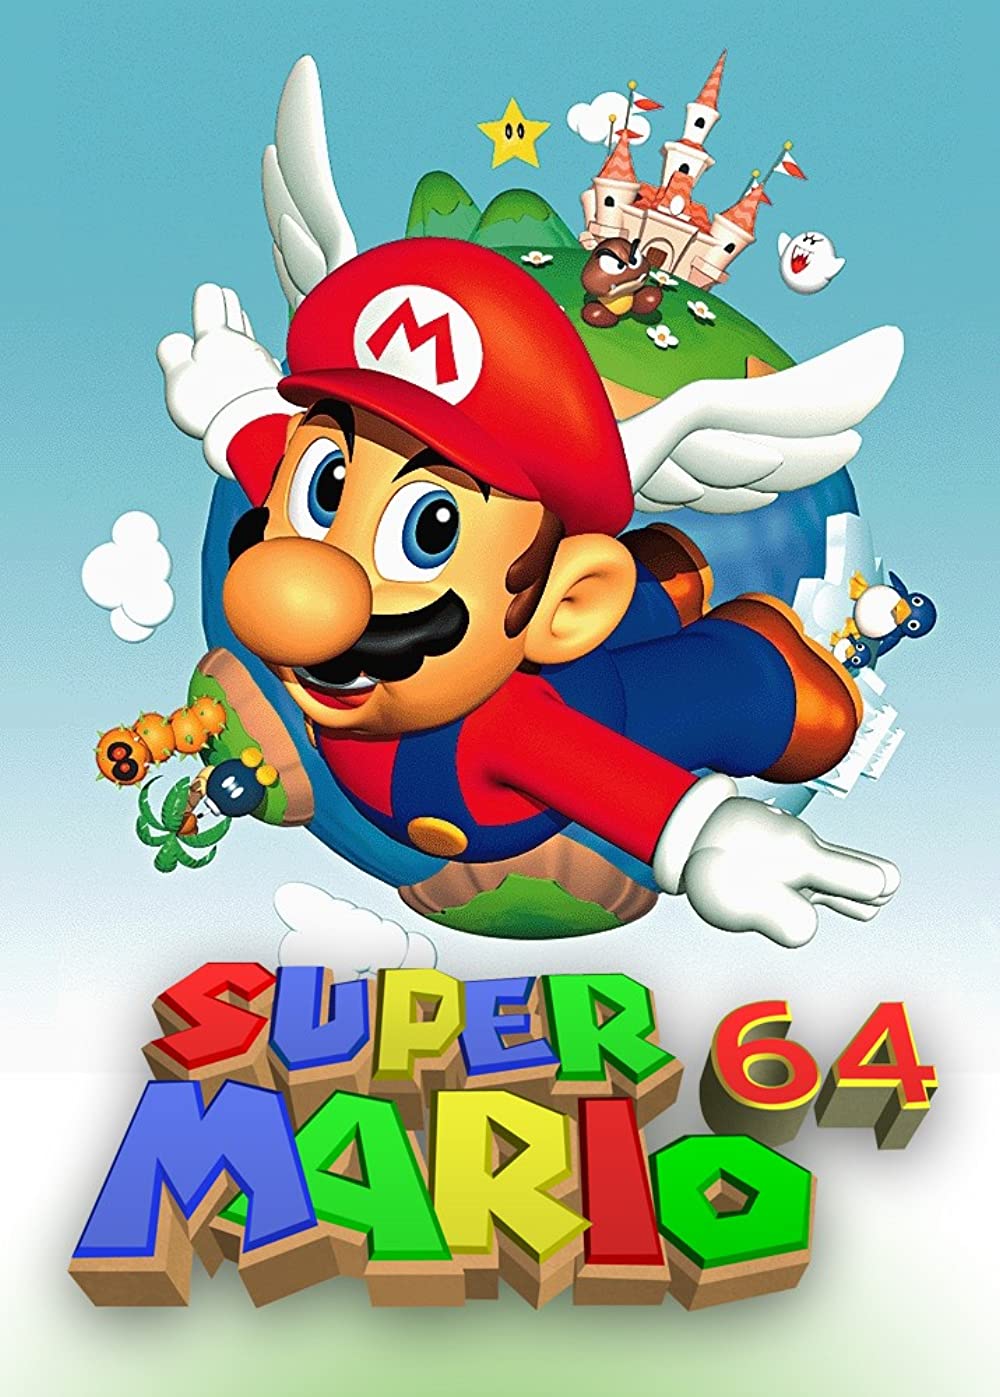 Super Mario 64 is a 1996 platform game for the Nintendo 64 and the first Super Mario game to feature 3D gameplay. It was developed by Nintendo EAD and published by Nintendo.